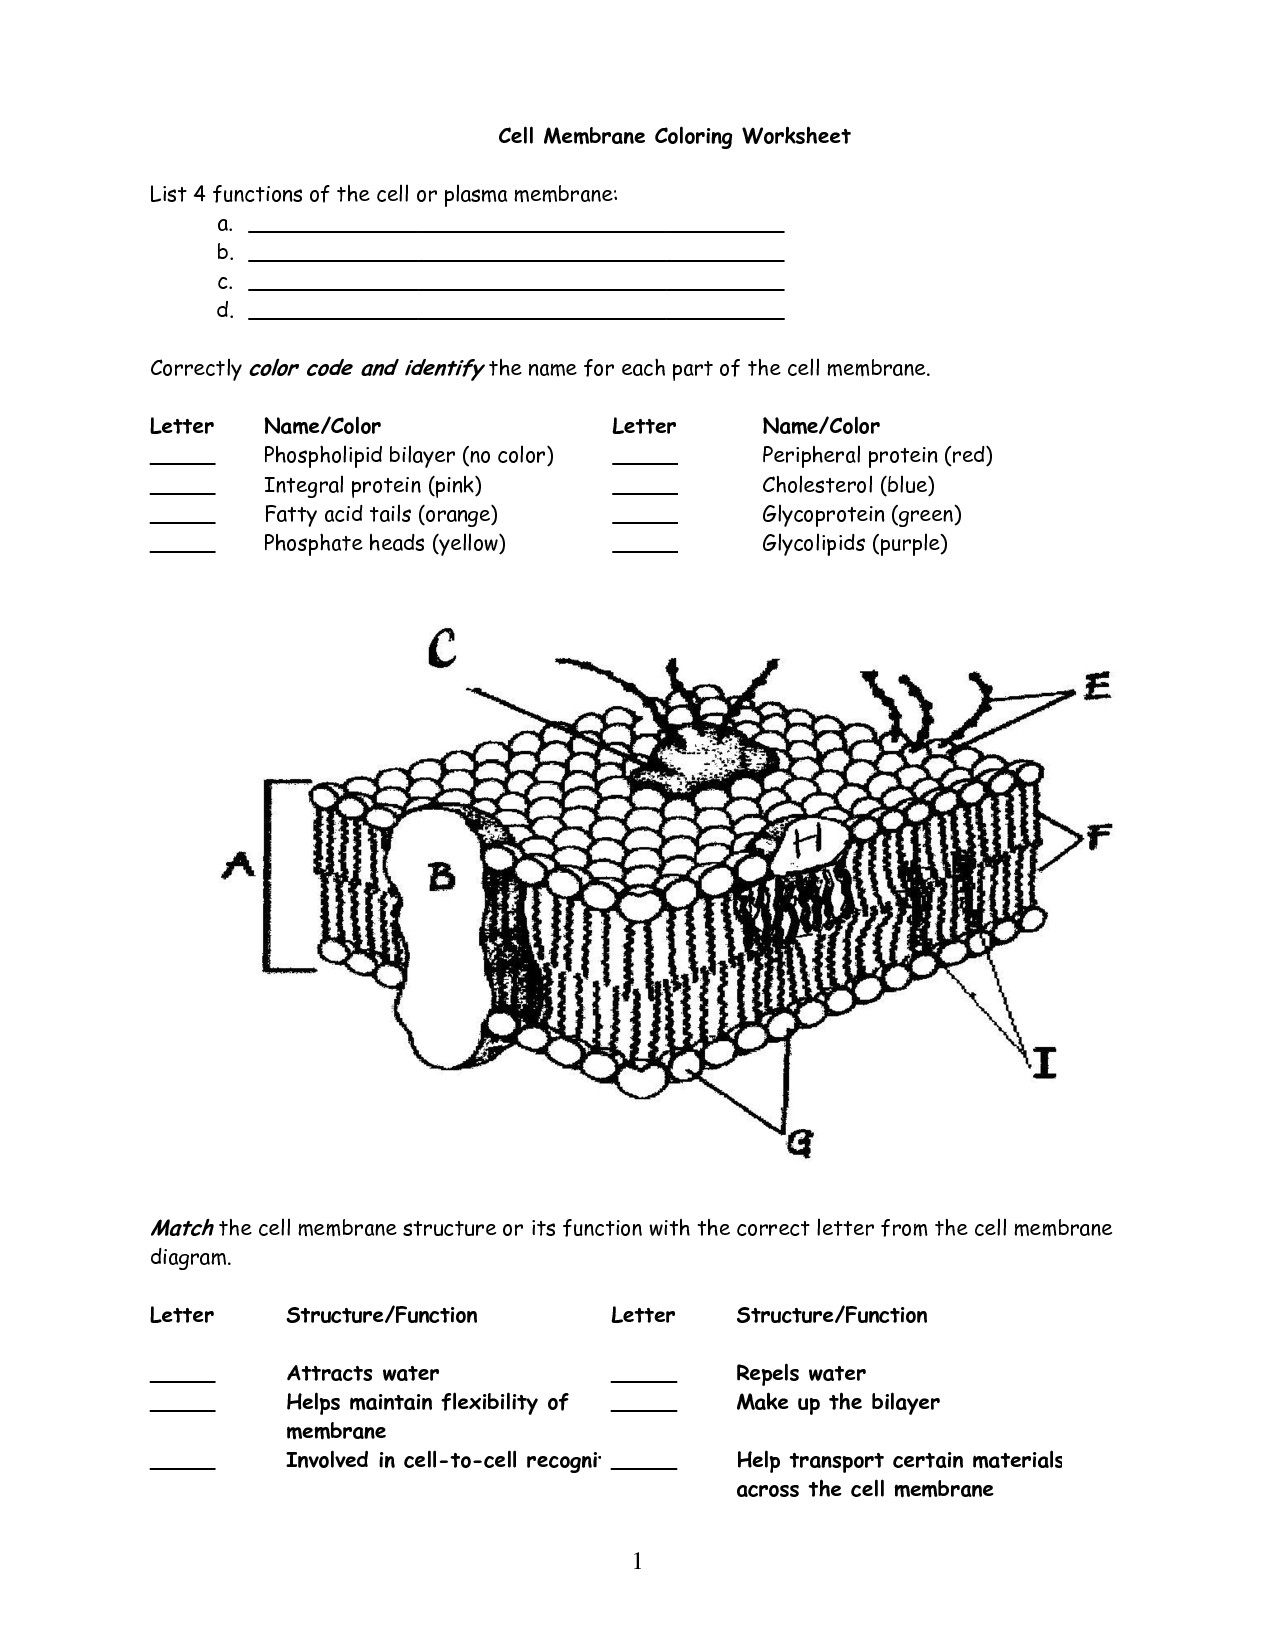 Cell Membrane Coloring Worksheet Fresh Cell Membrane db excel com